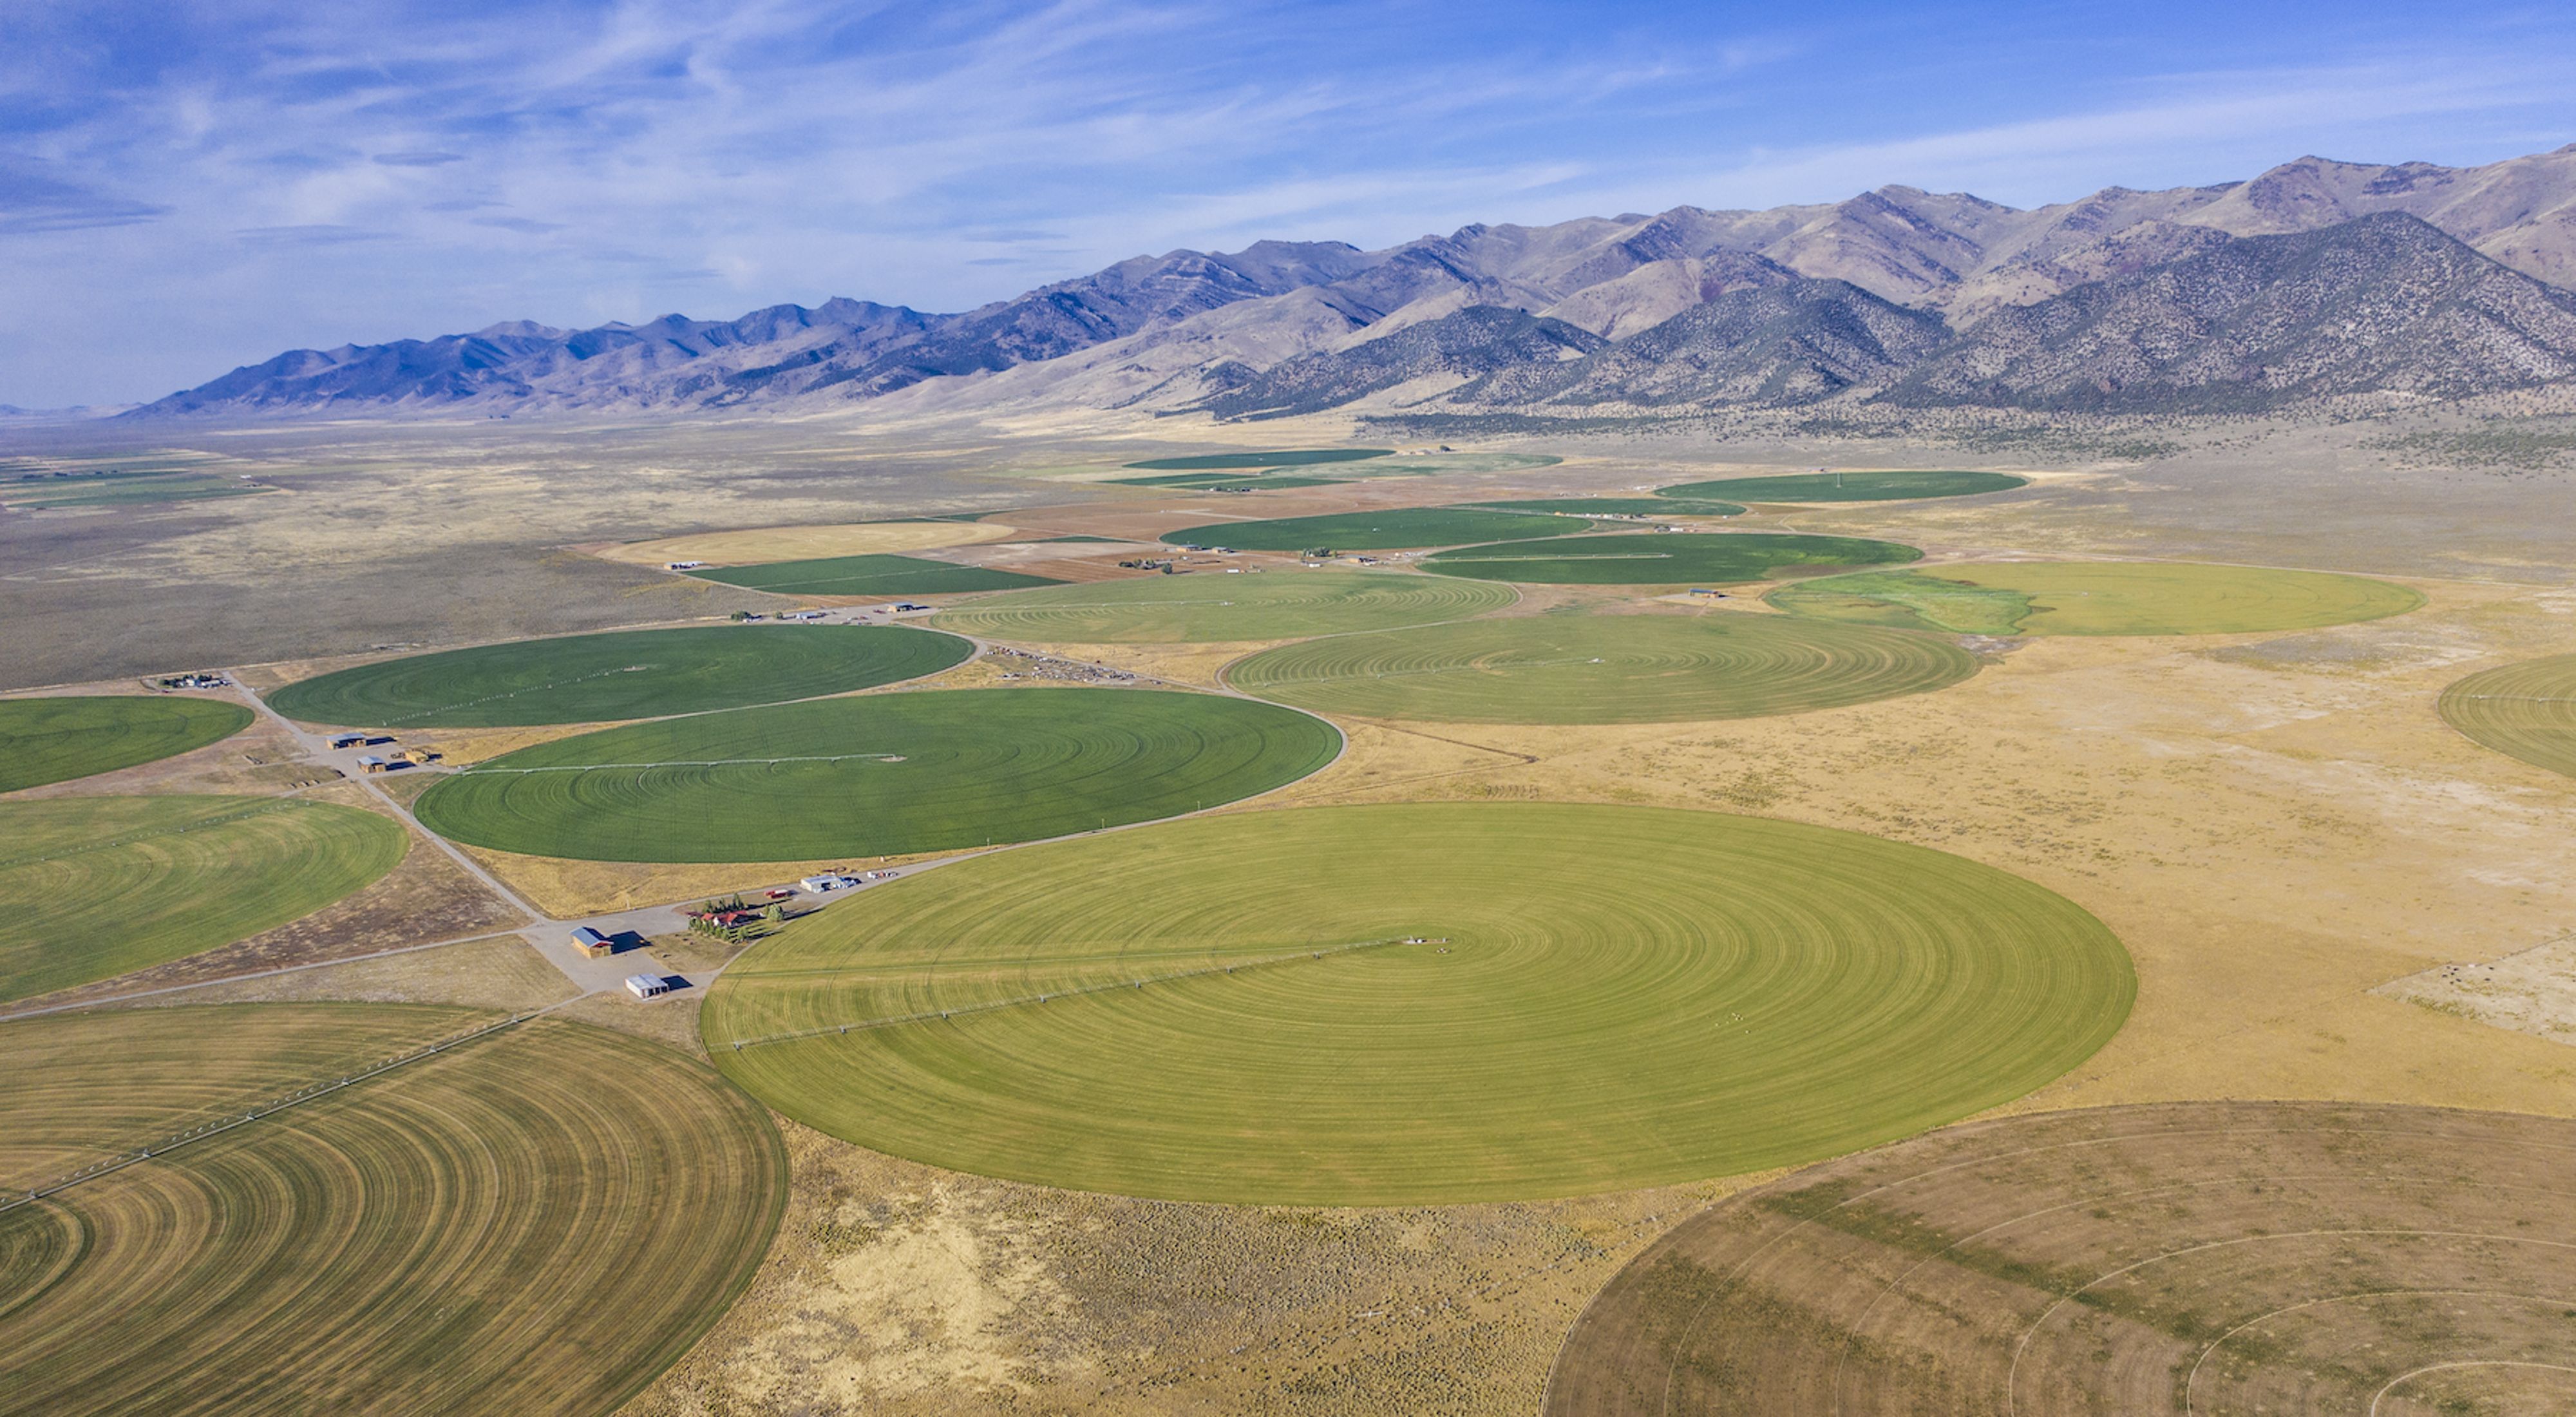 Aerial view of agricultural fields in Diamond Valley, with a mountain range in the background.